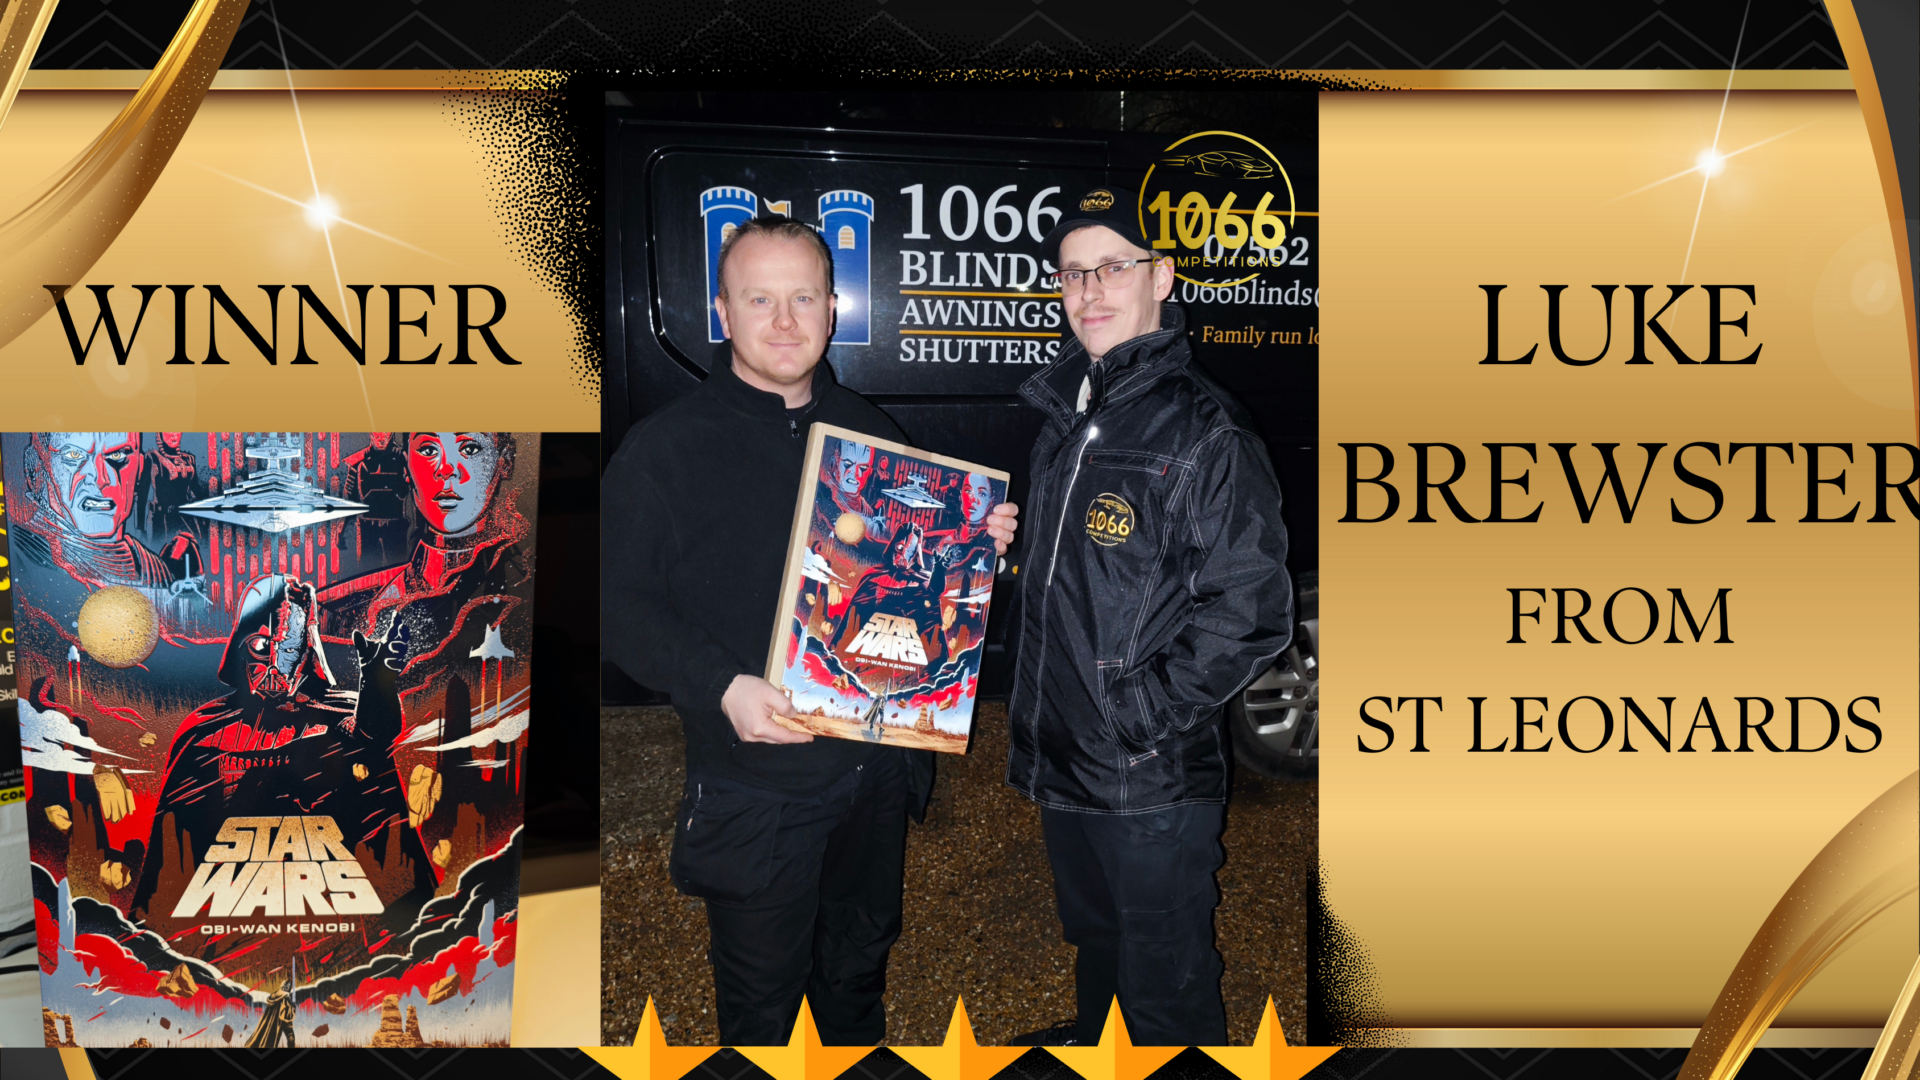 Congratulations to Luke Brewster from Bexhill, winner of a limited edition Star Wars Displate!